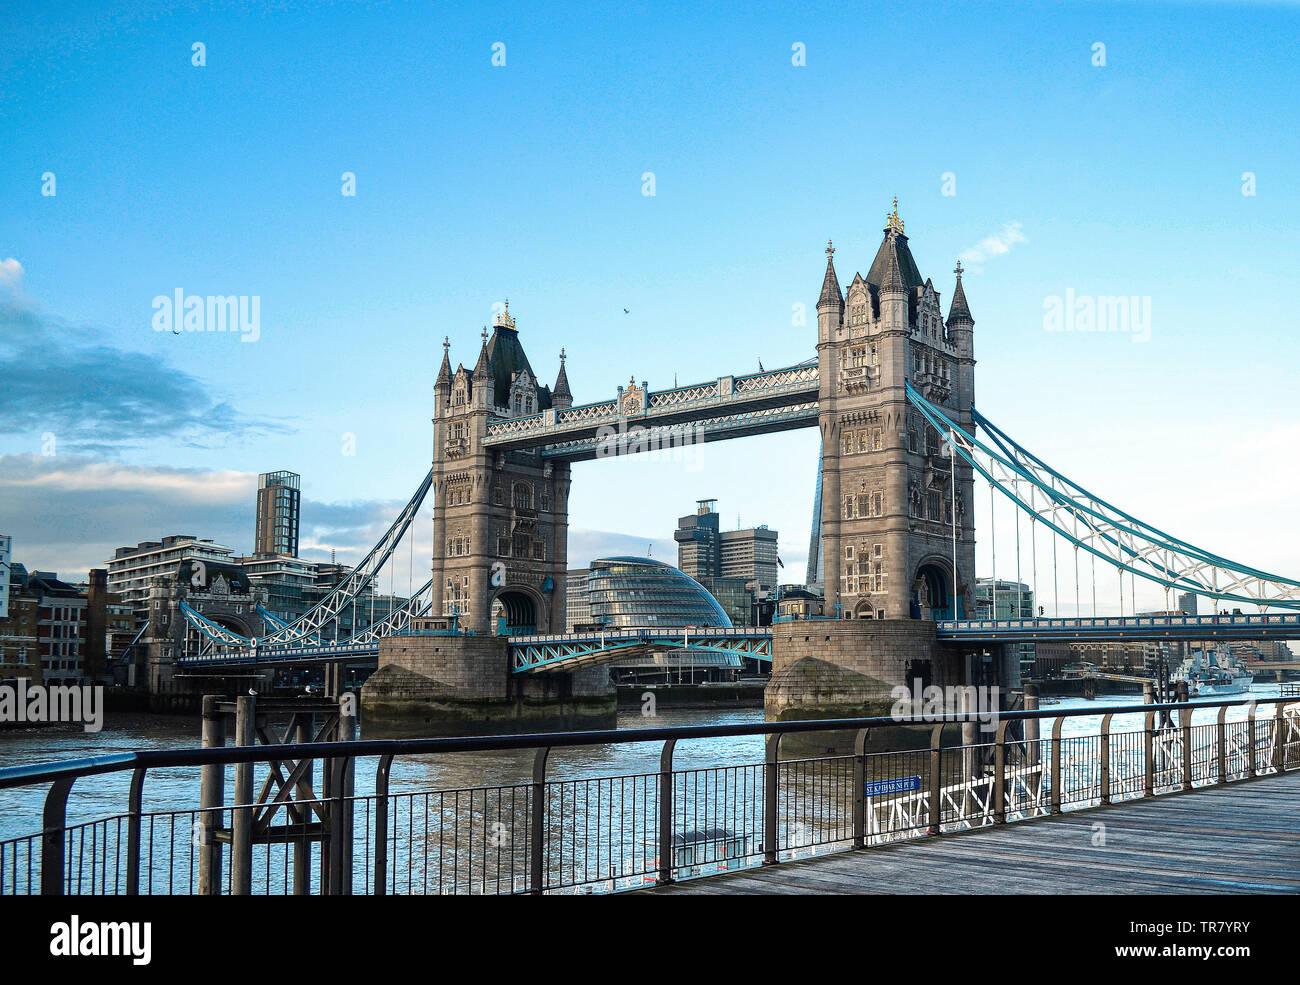 Tower Bridge is a road bridge over the River Thames in London and named after the nearby Tower of London. Opened in 1894. landmark of England. Stock Photo